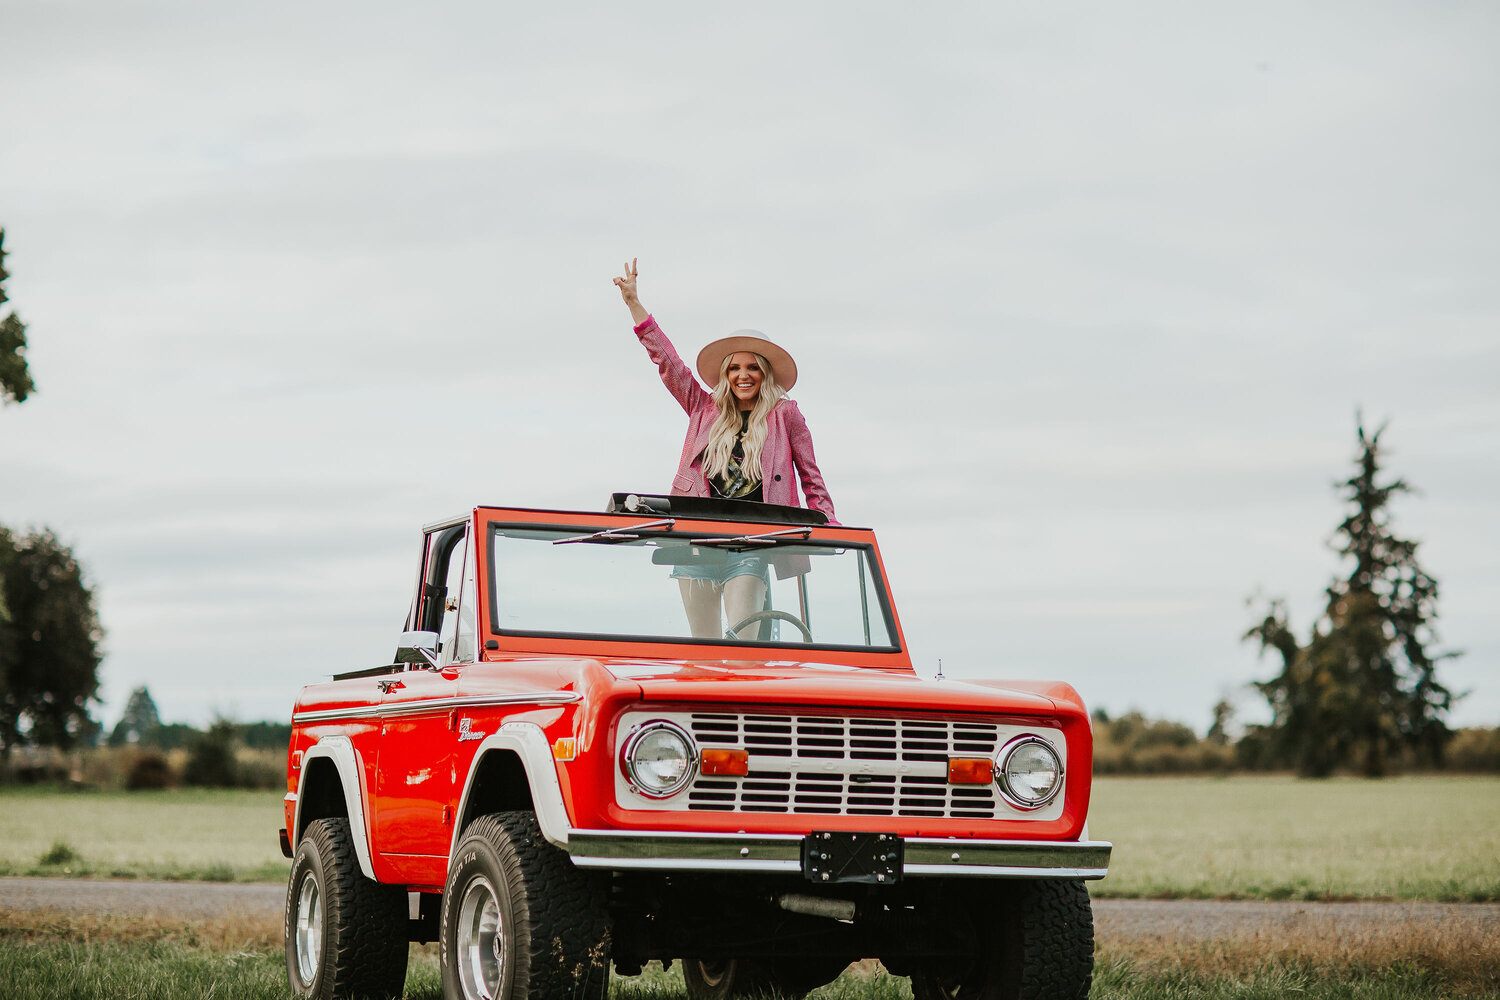 Musician, Britnee Kellogg poses with a outstretched arm, making a peace sign. She is standing in a red Jeep and is wearing pink leather jacket and wide brim hat.